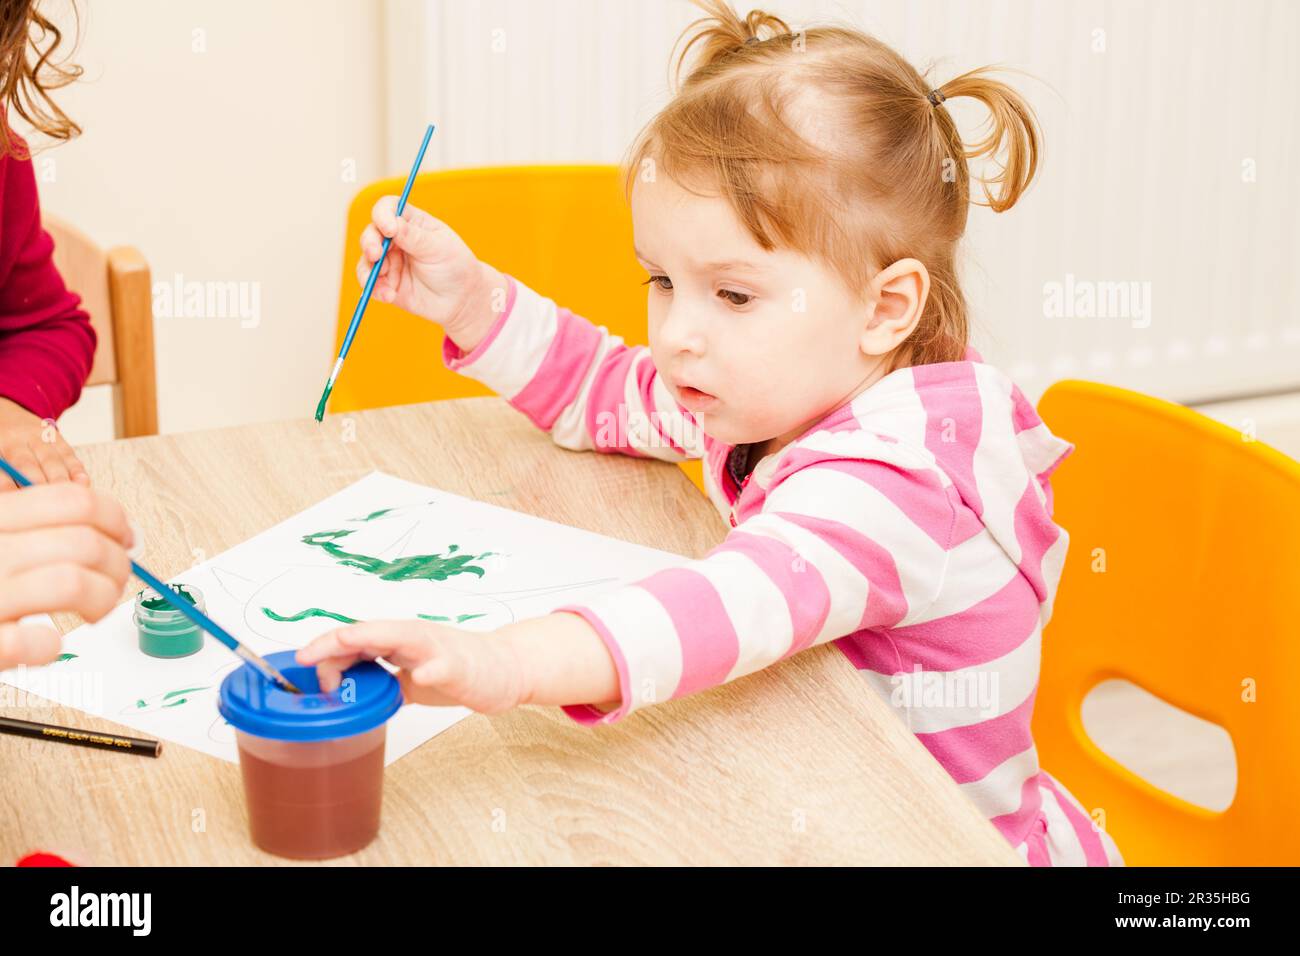 Girl is painting Stock Photo